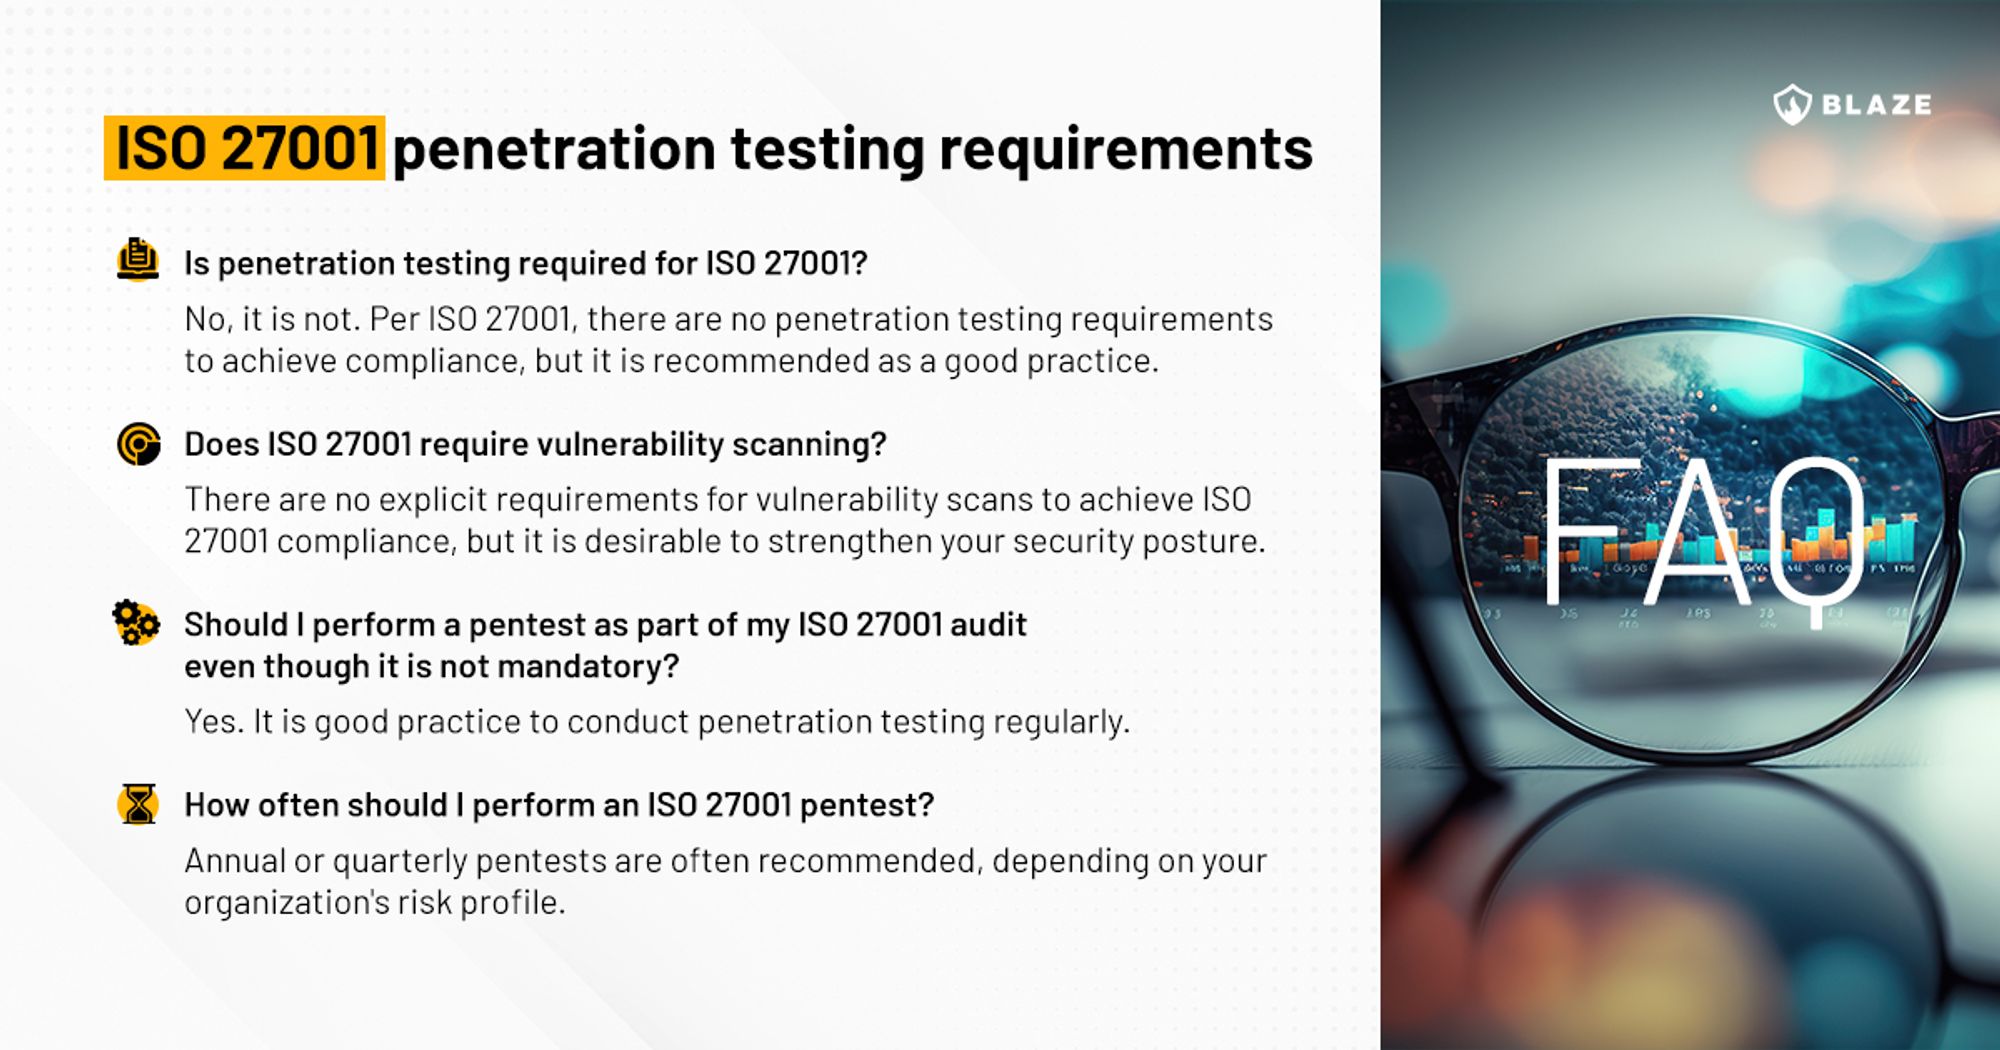 ISO 27001 penetration testing requirements